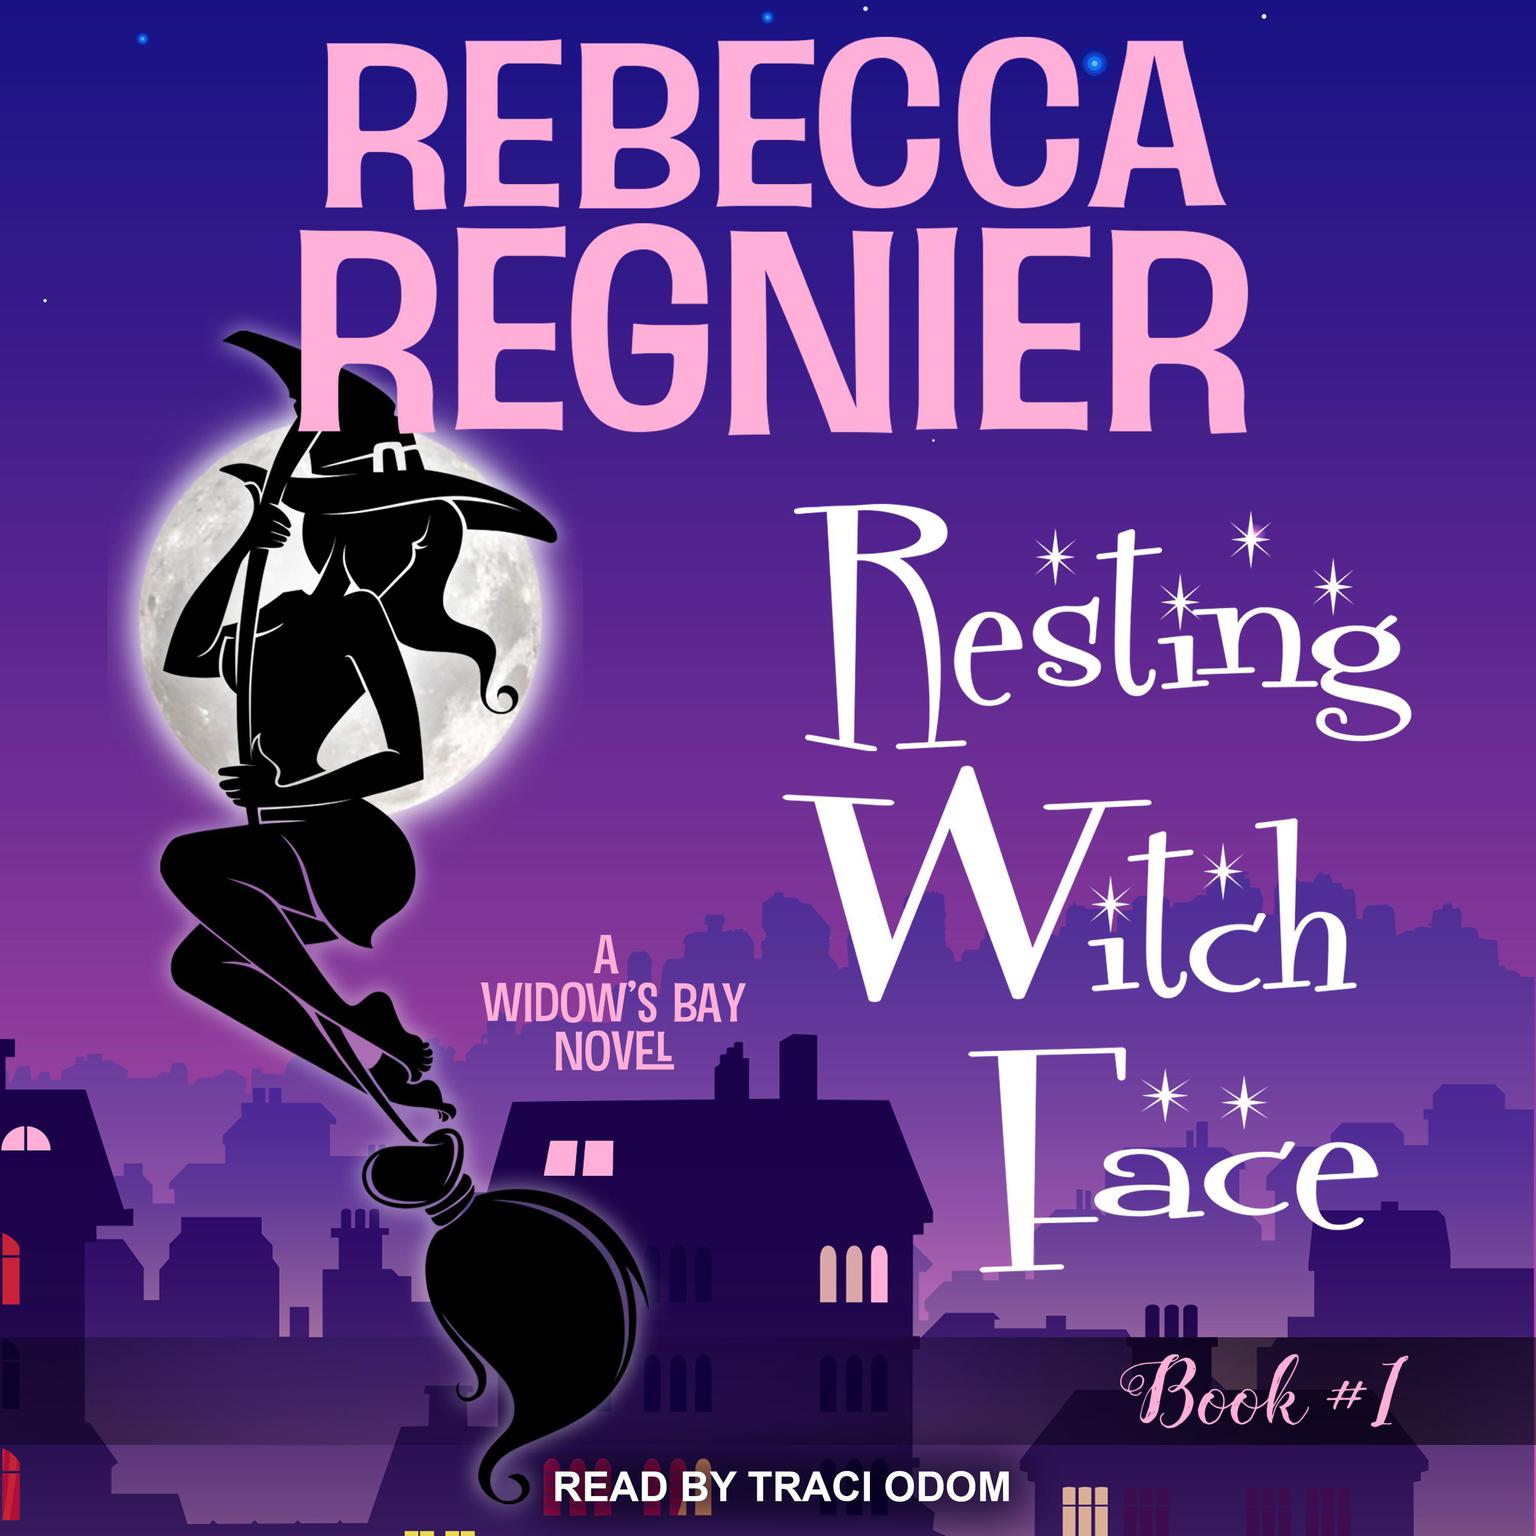 Resting Witch Face: A Widows Bay Novel Audiobook, by Rebecca Regnier